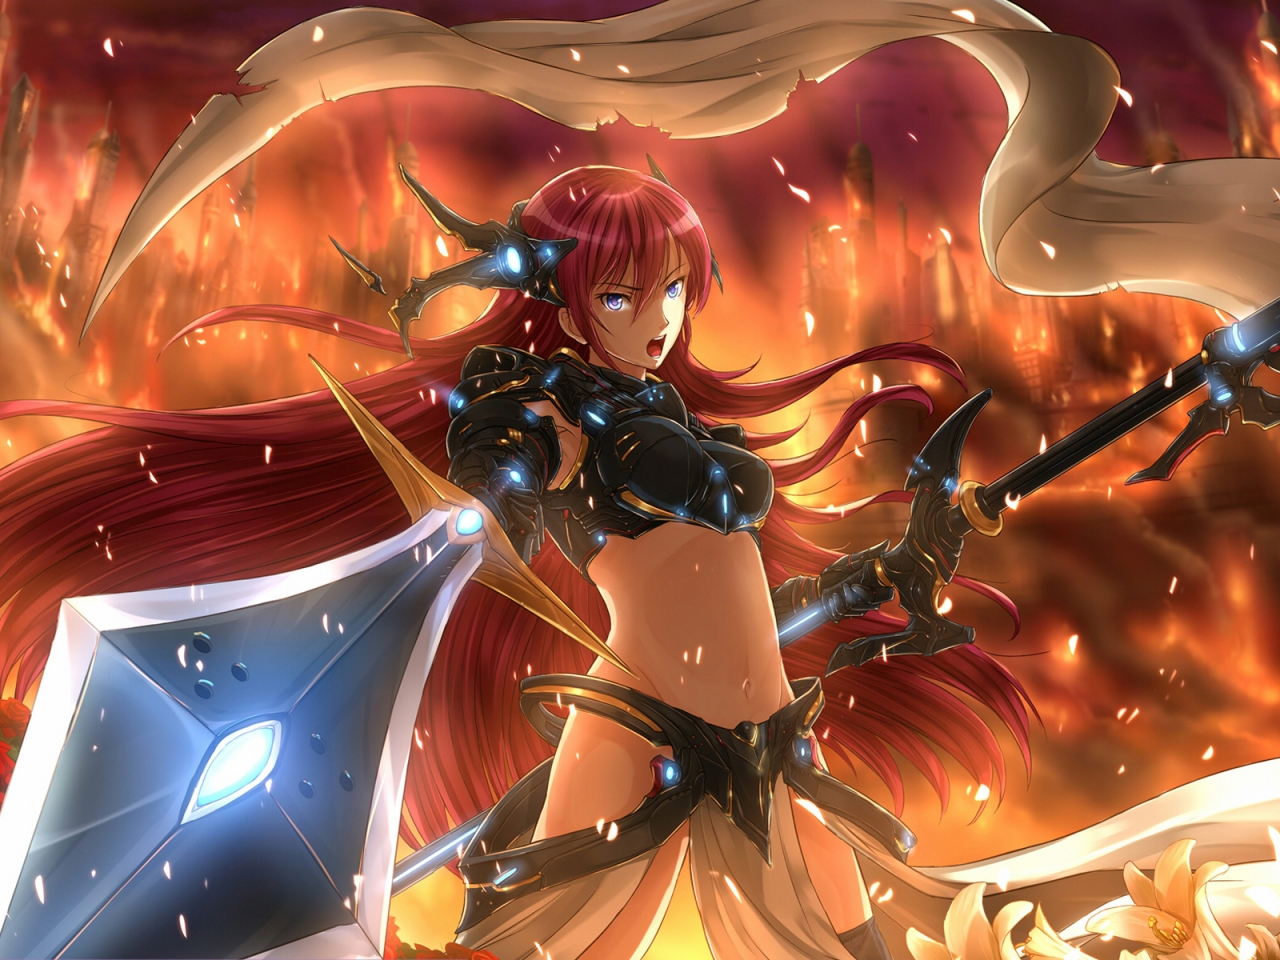 Megurine Luka in Fire for 1280 x 960 resolution